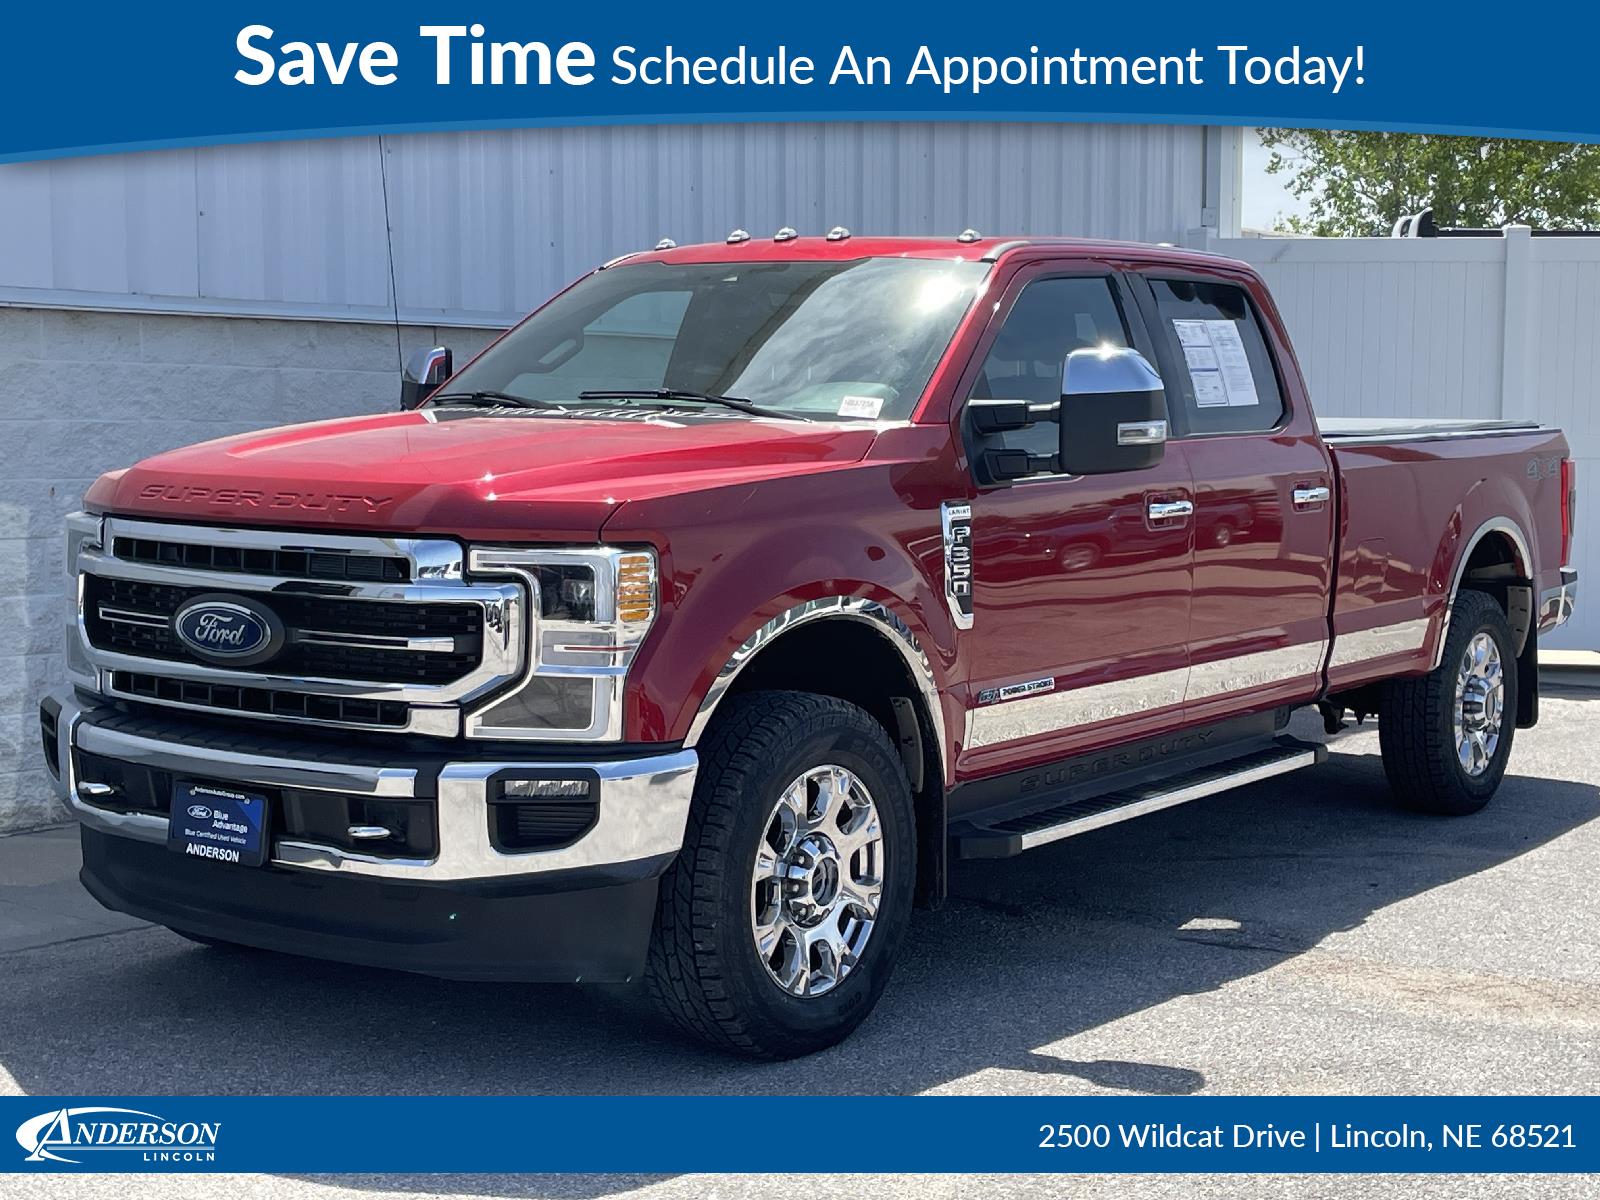 Used 2021 Ford Super Duty F-350 SRW LARIAT Stock: 1003723A